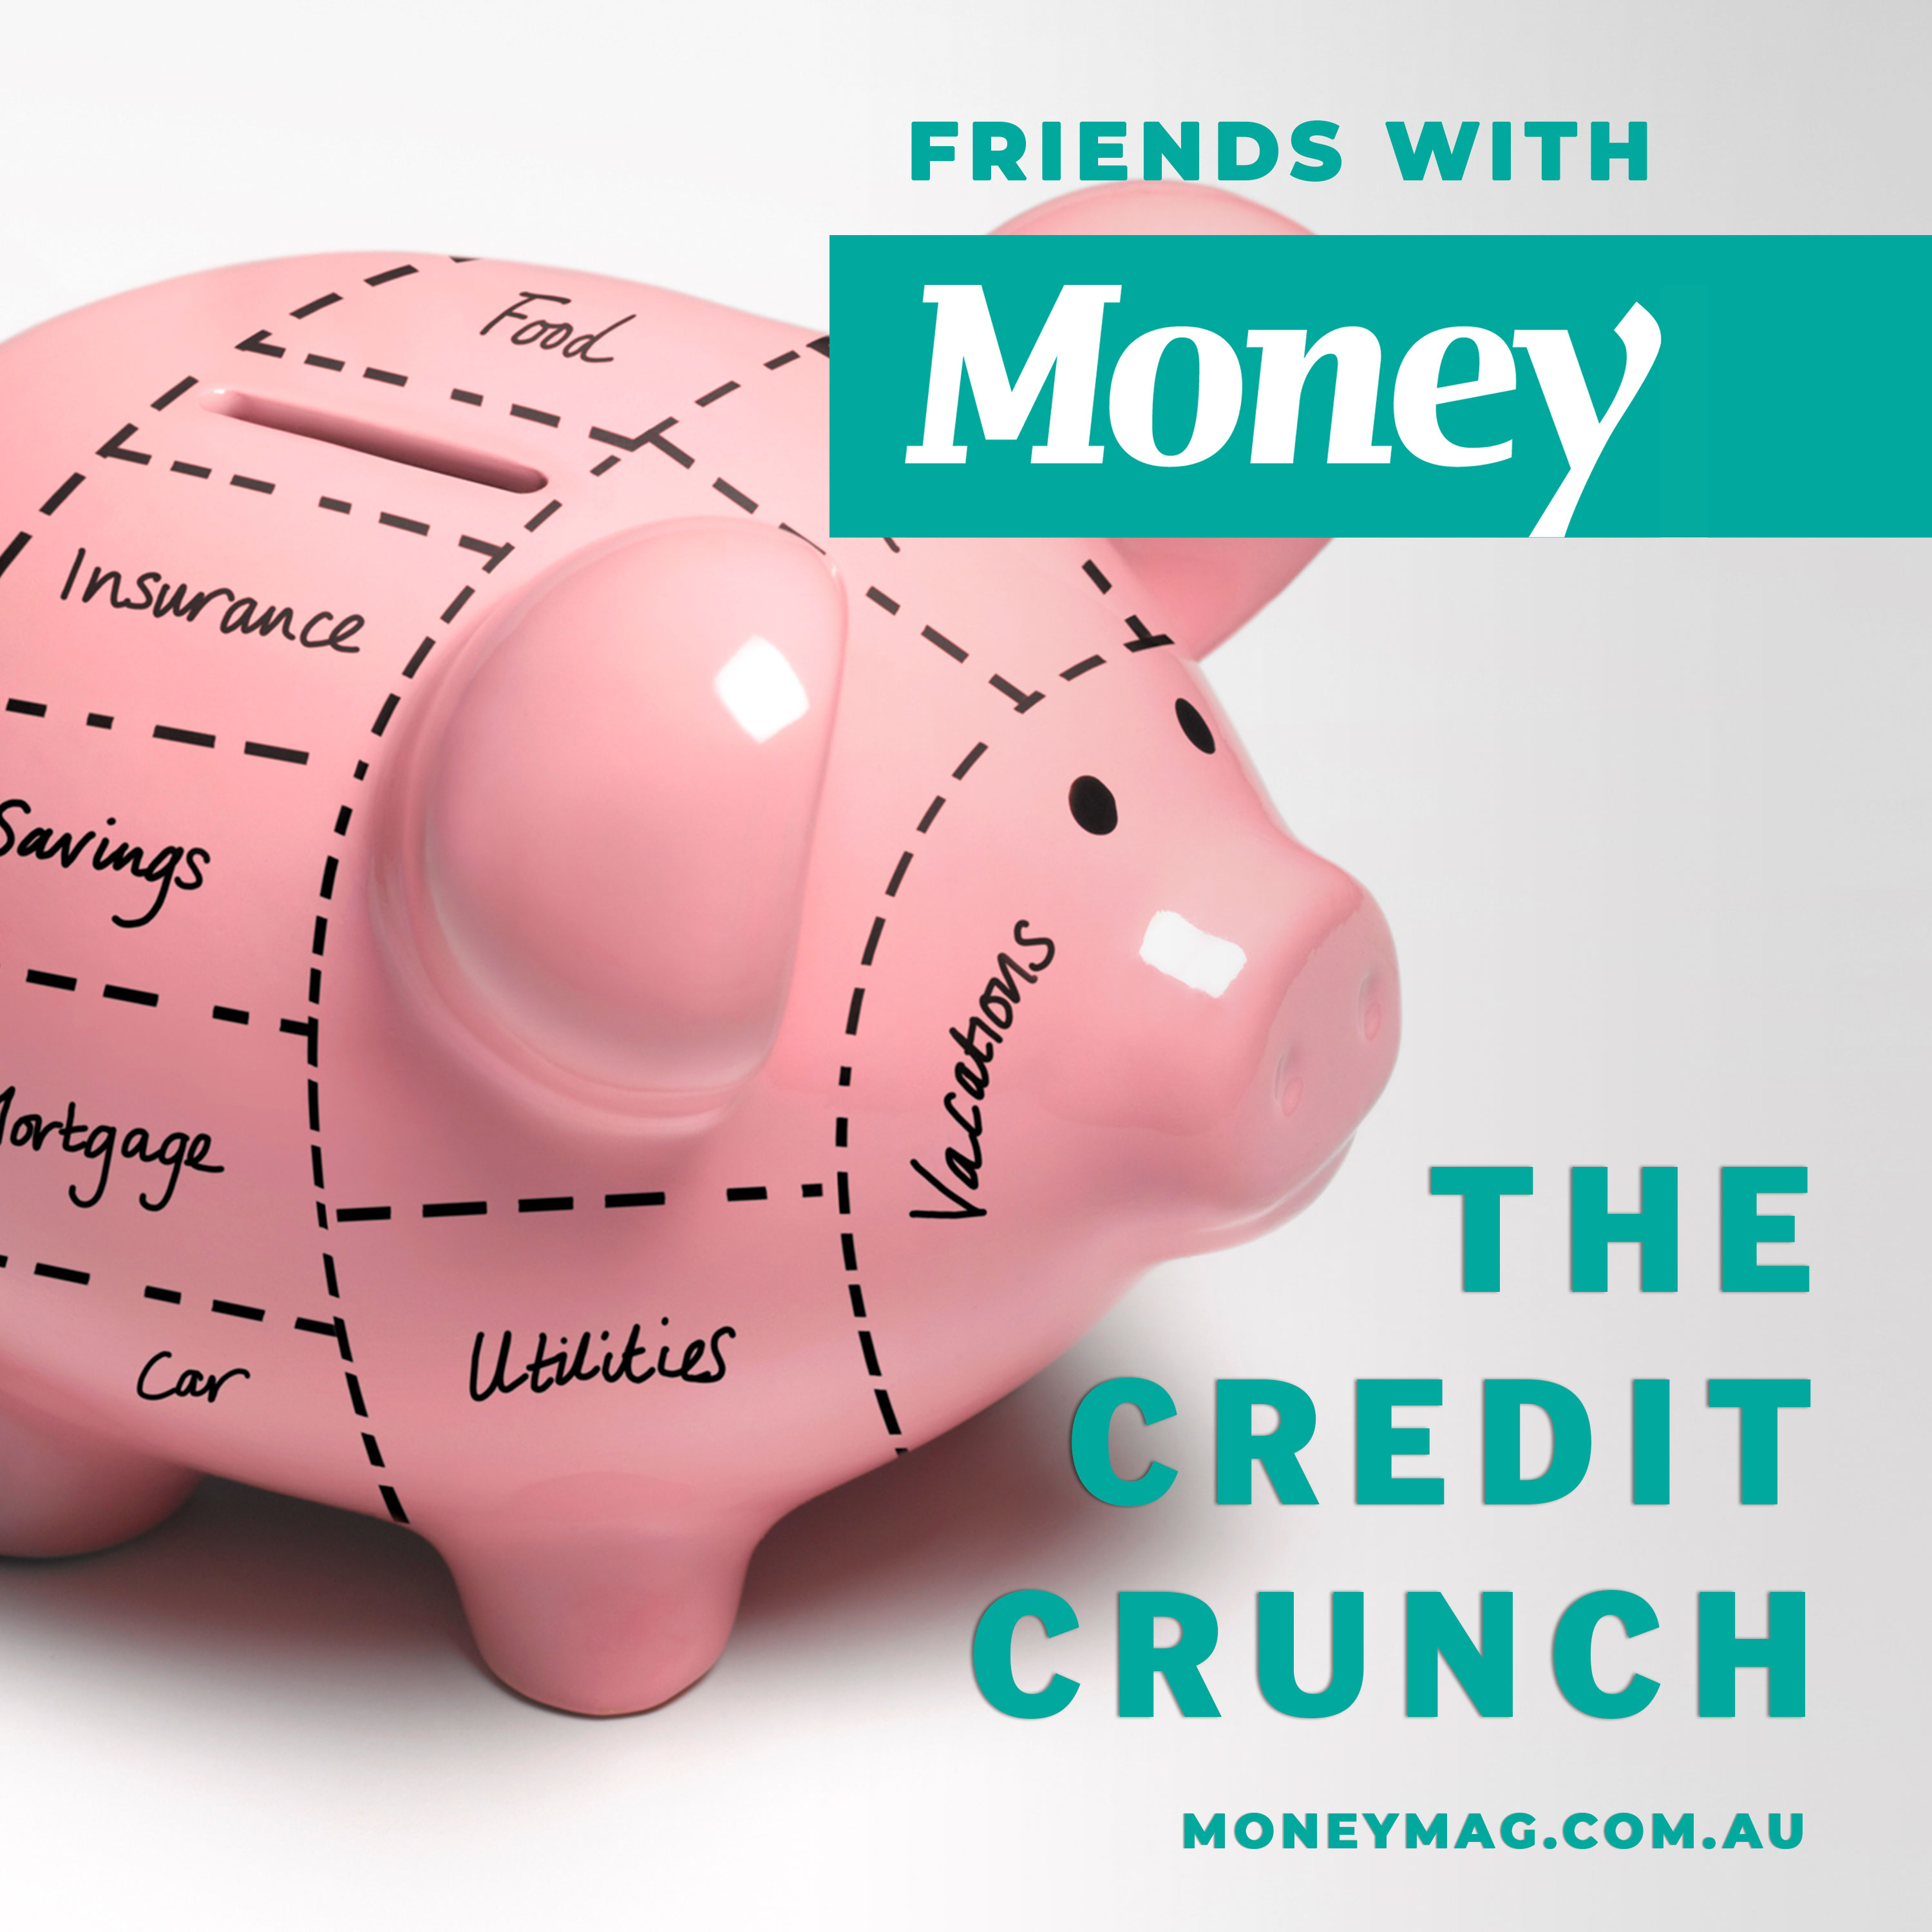 The credit crunch